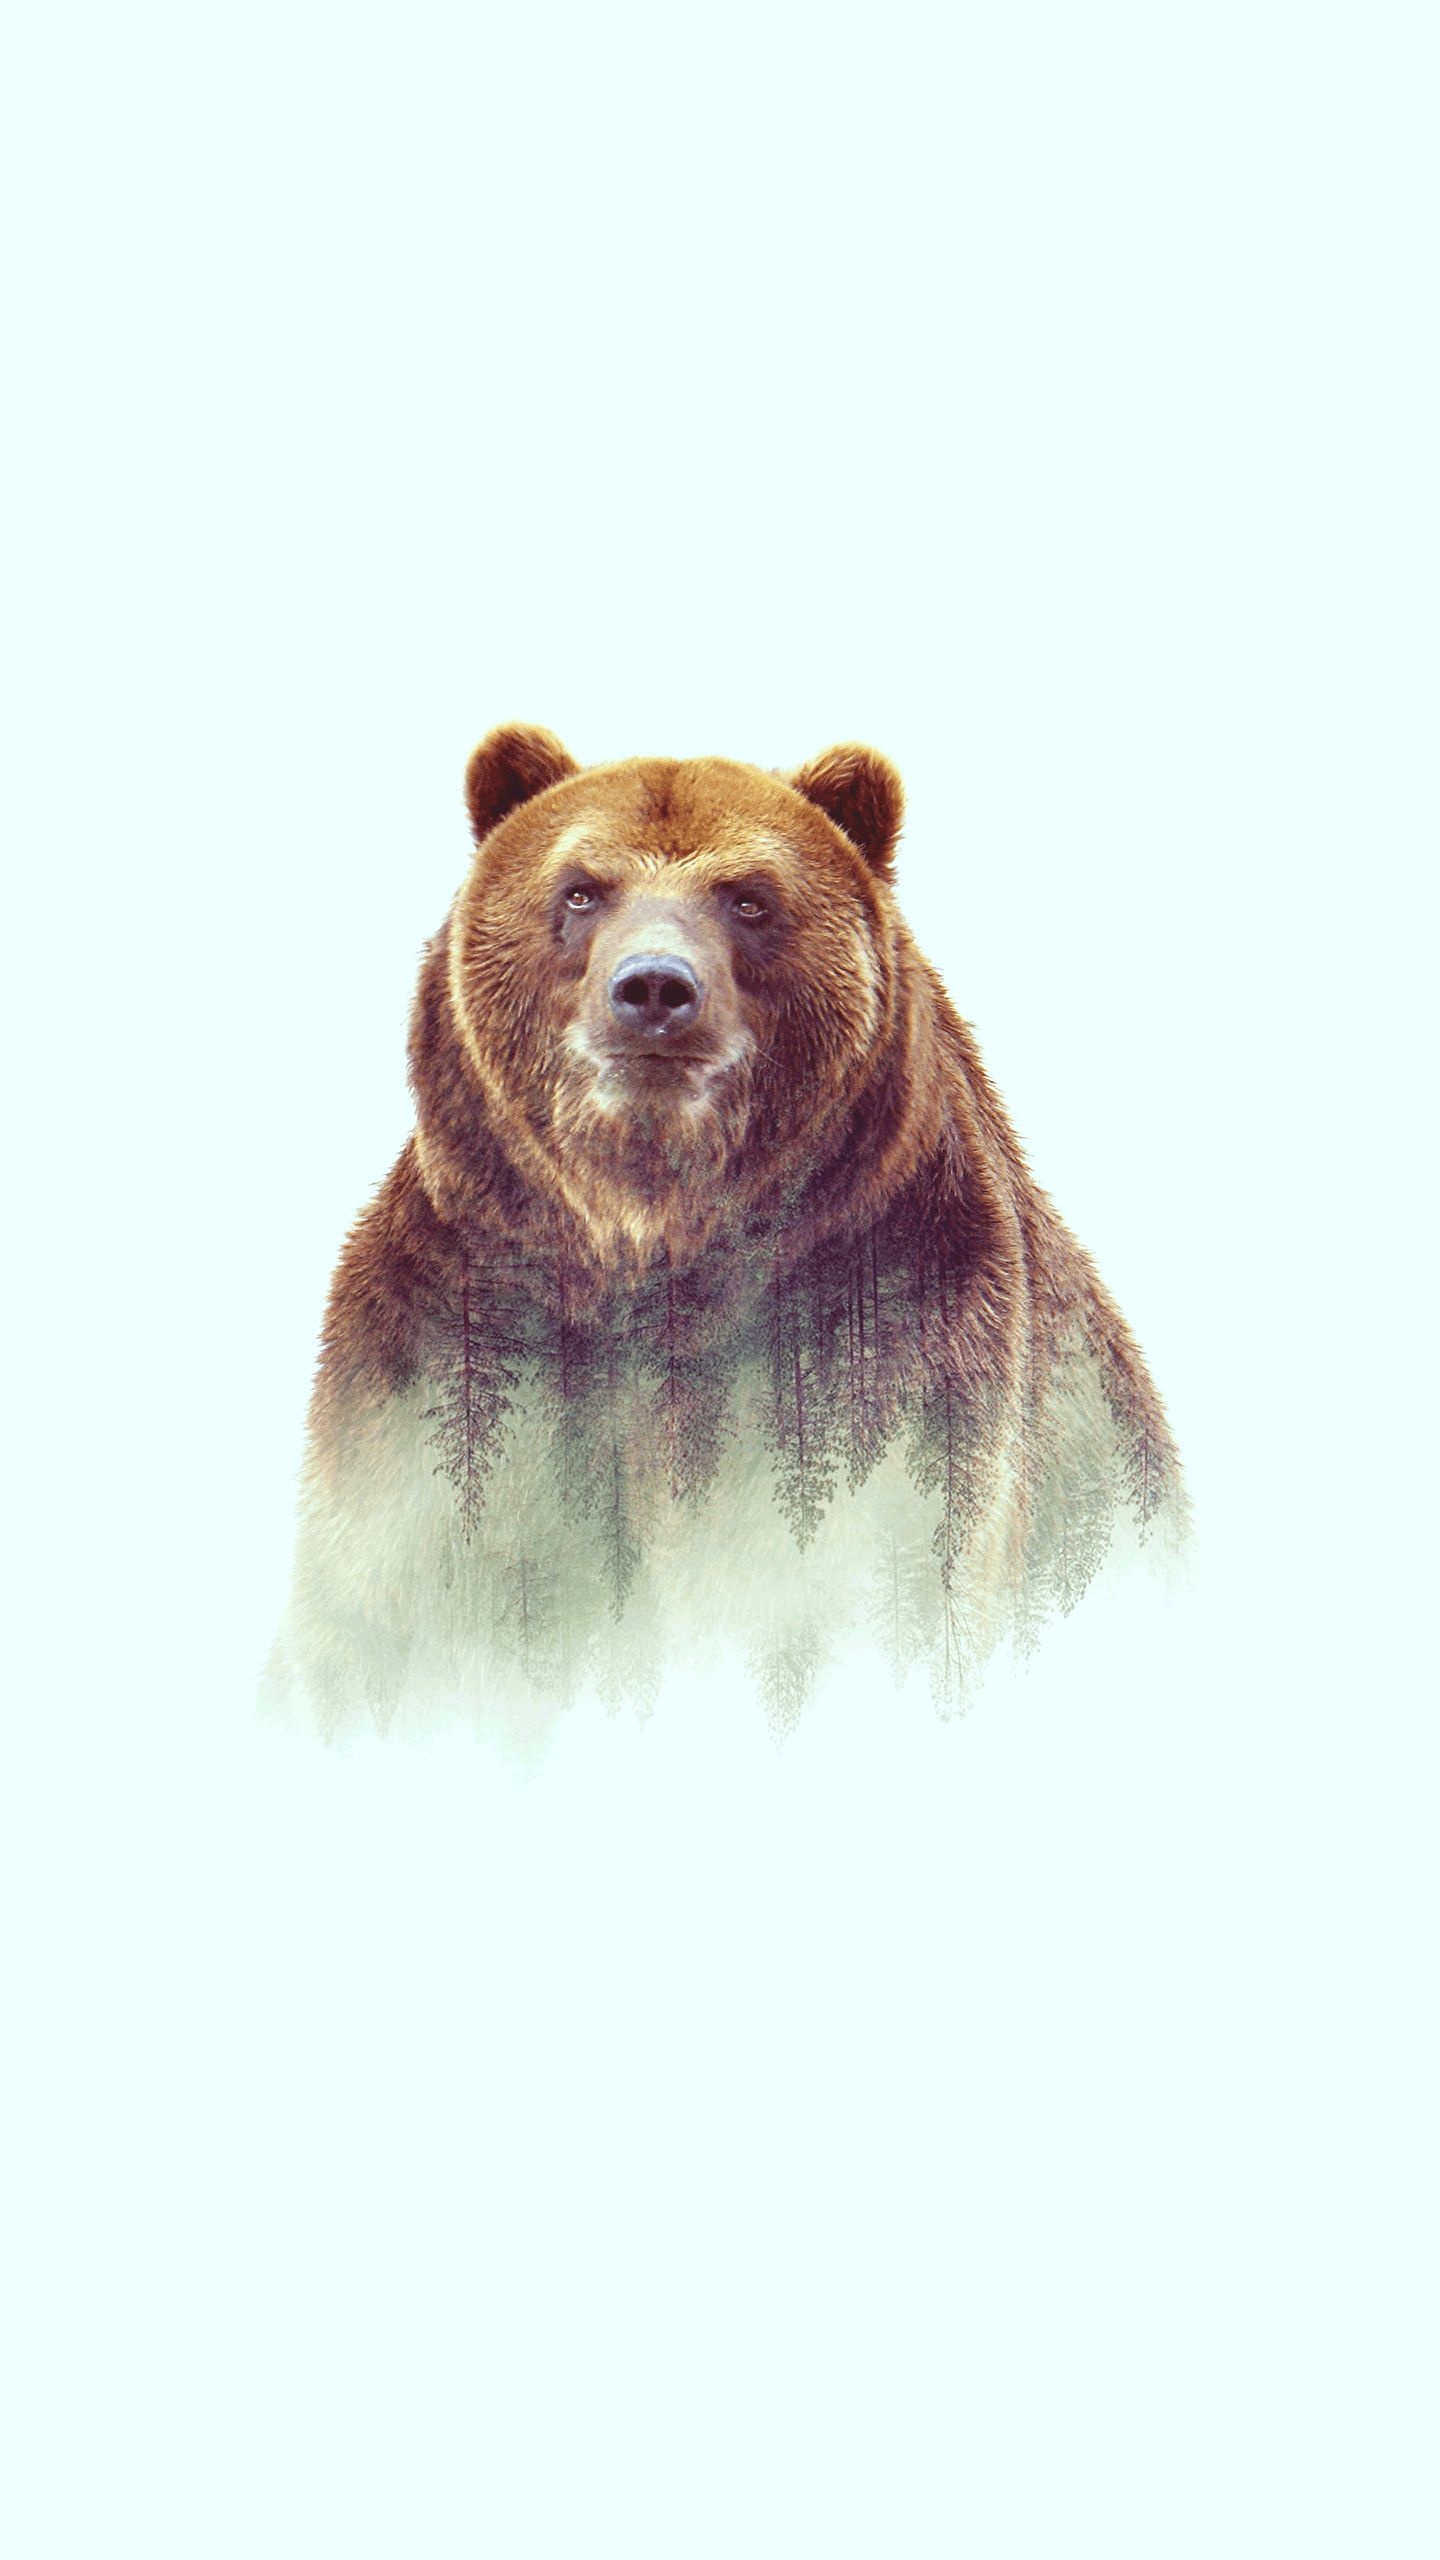 Grizzly Bear, Artistic iPhone wallpaper, Creative image, Stunning wallpaper, 1440x2560 HD Phone